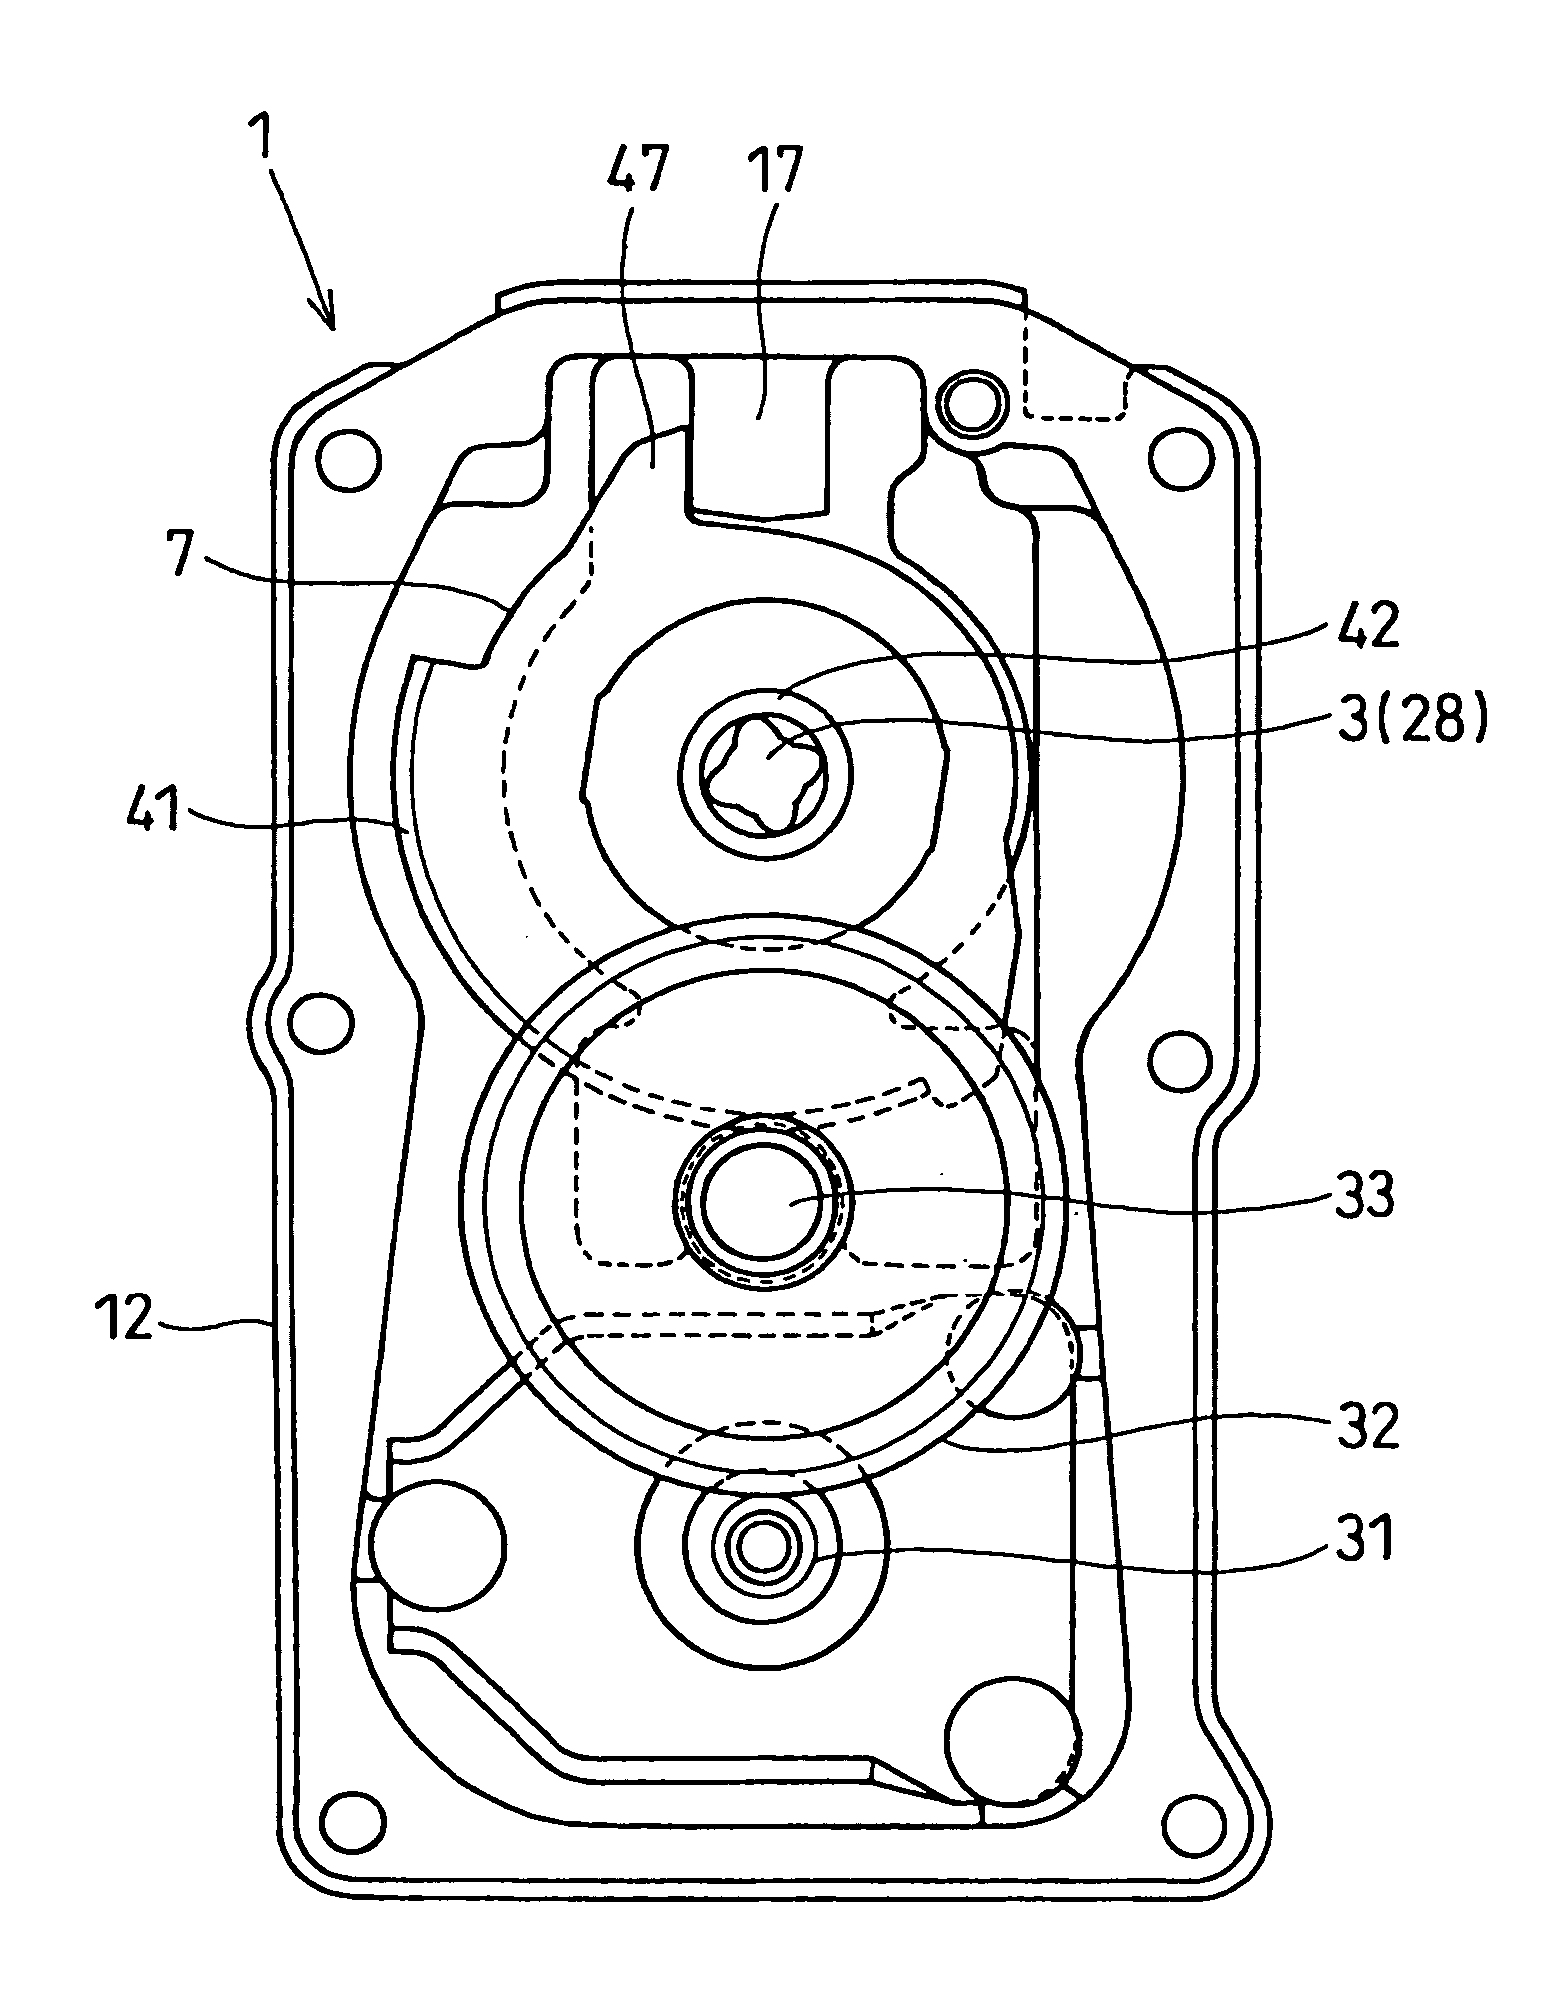 Intake control device for internal combustion engine